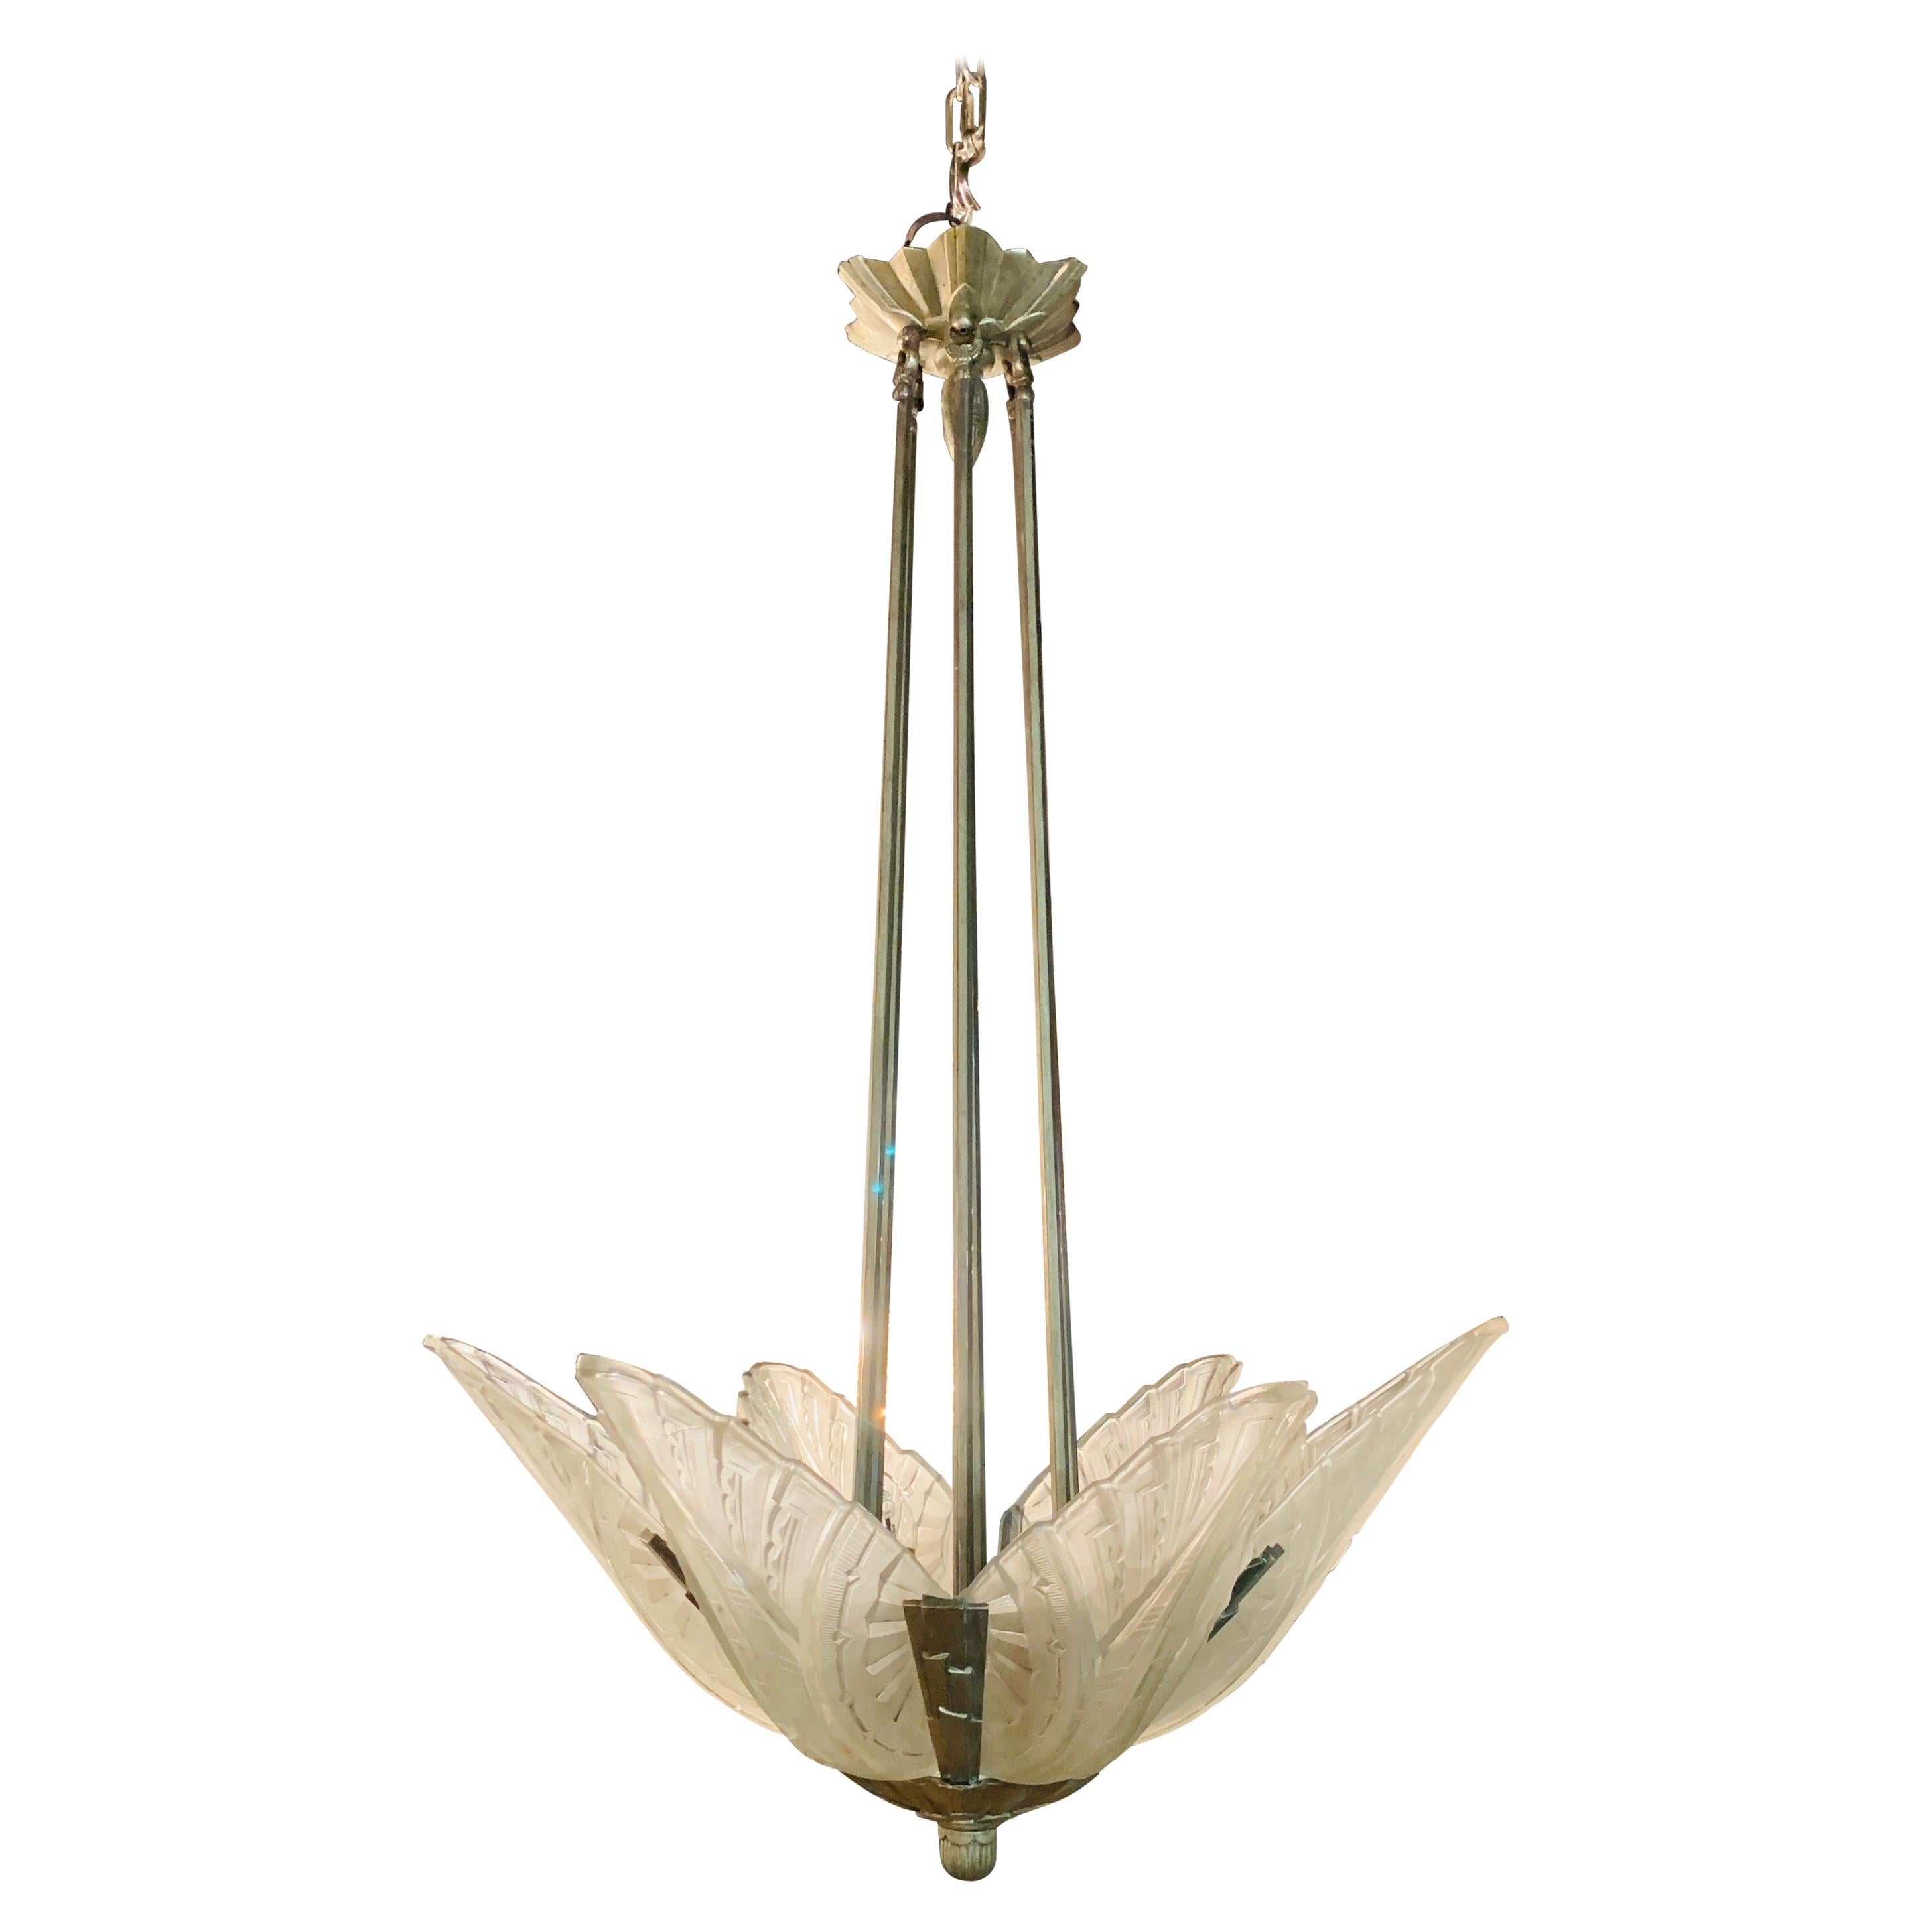 Elegant French Art Deco Chandelier with Five Clear Frosted Glass Panels